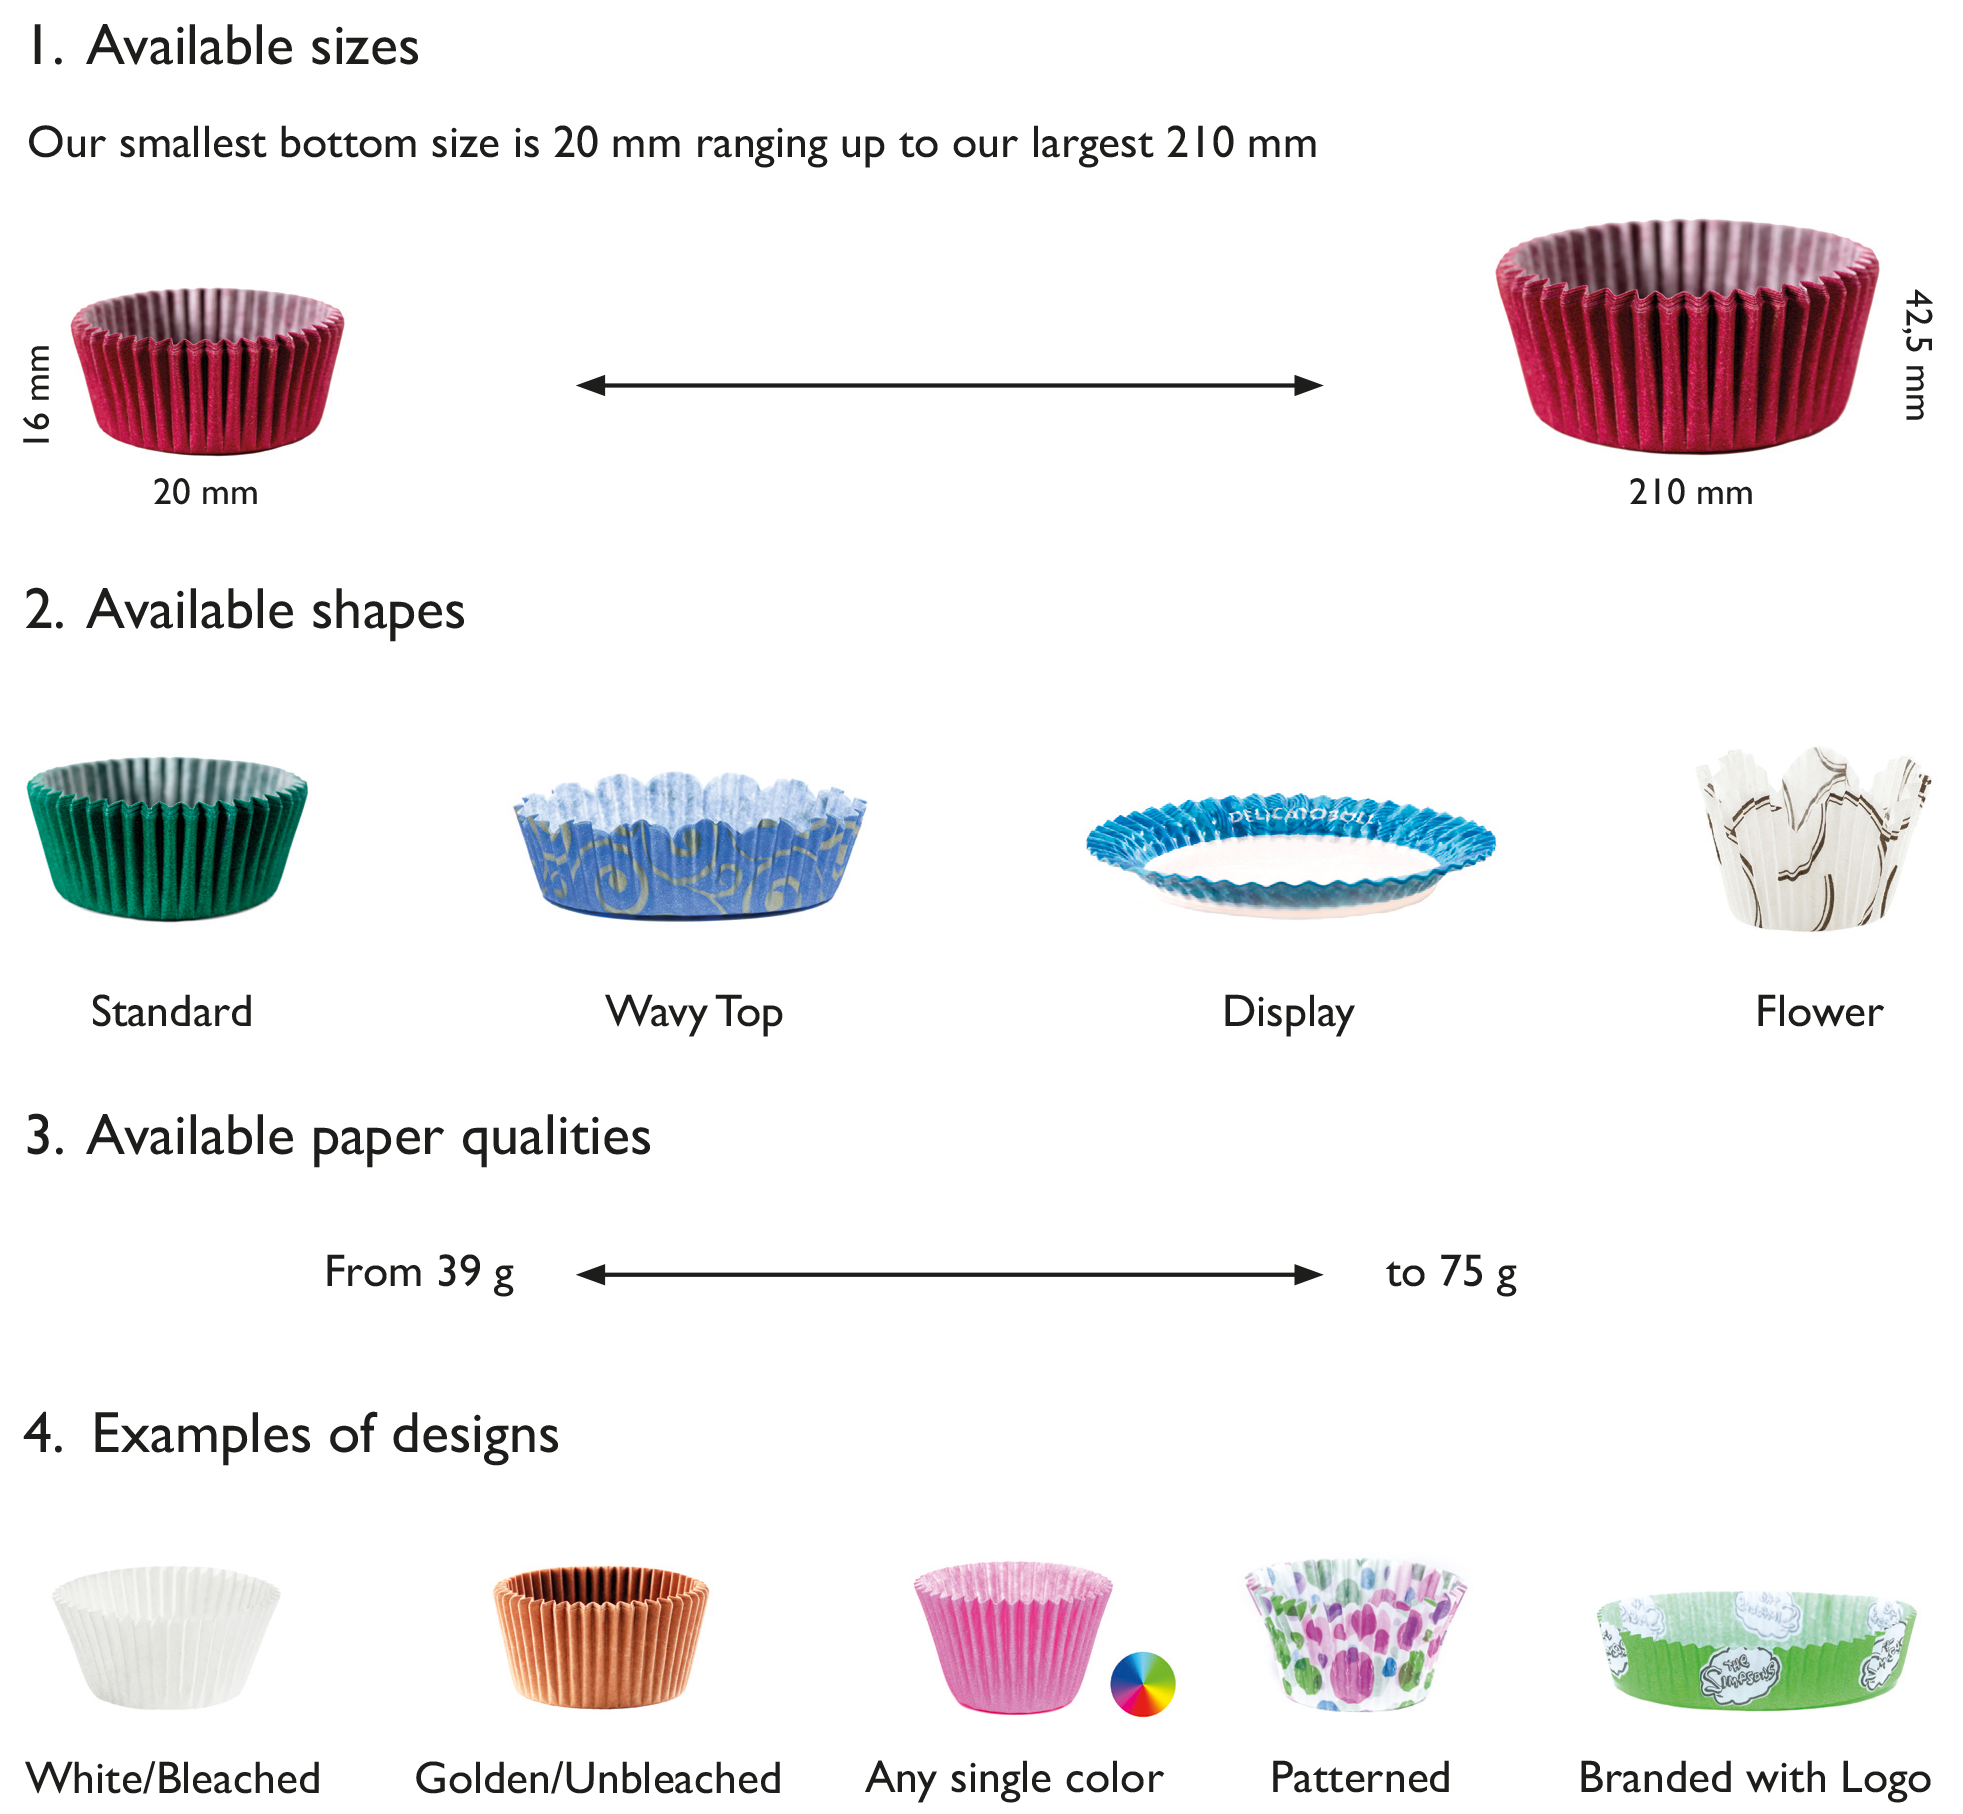 Baking Cup sizes